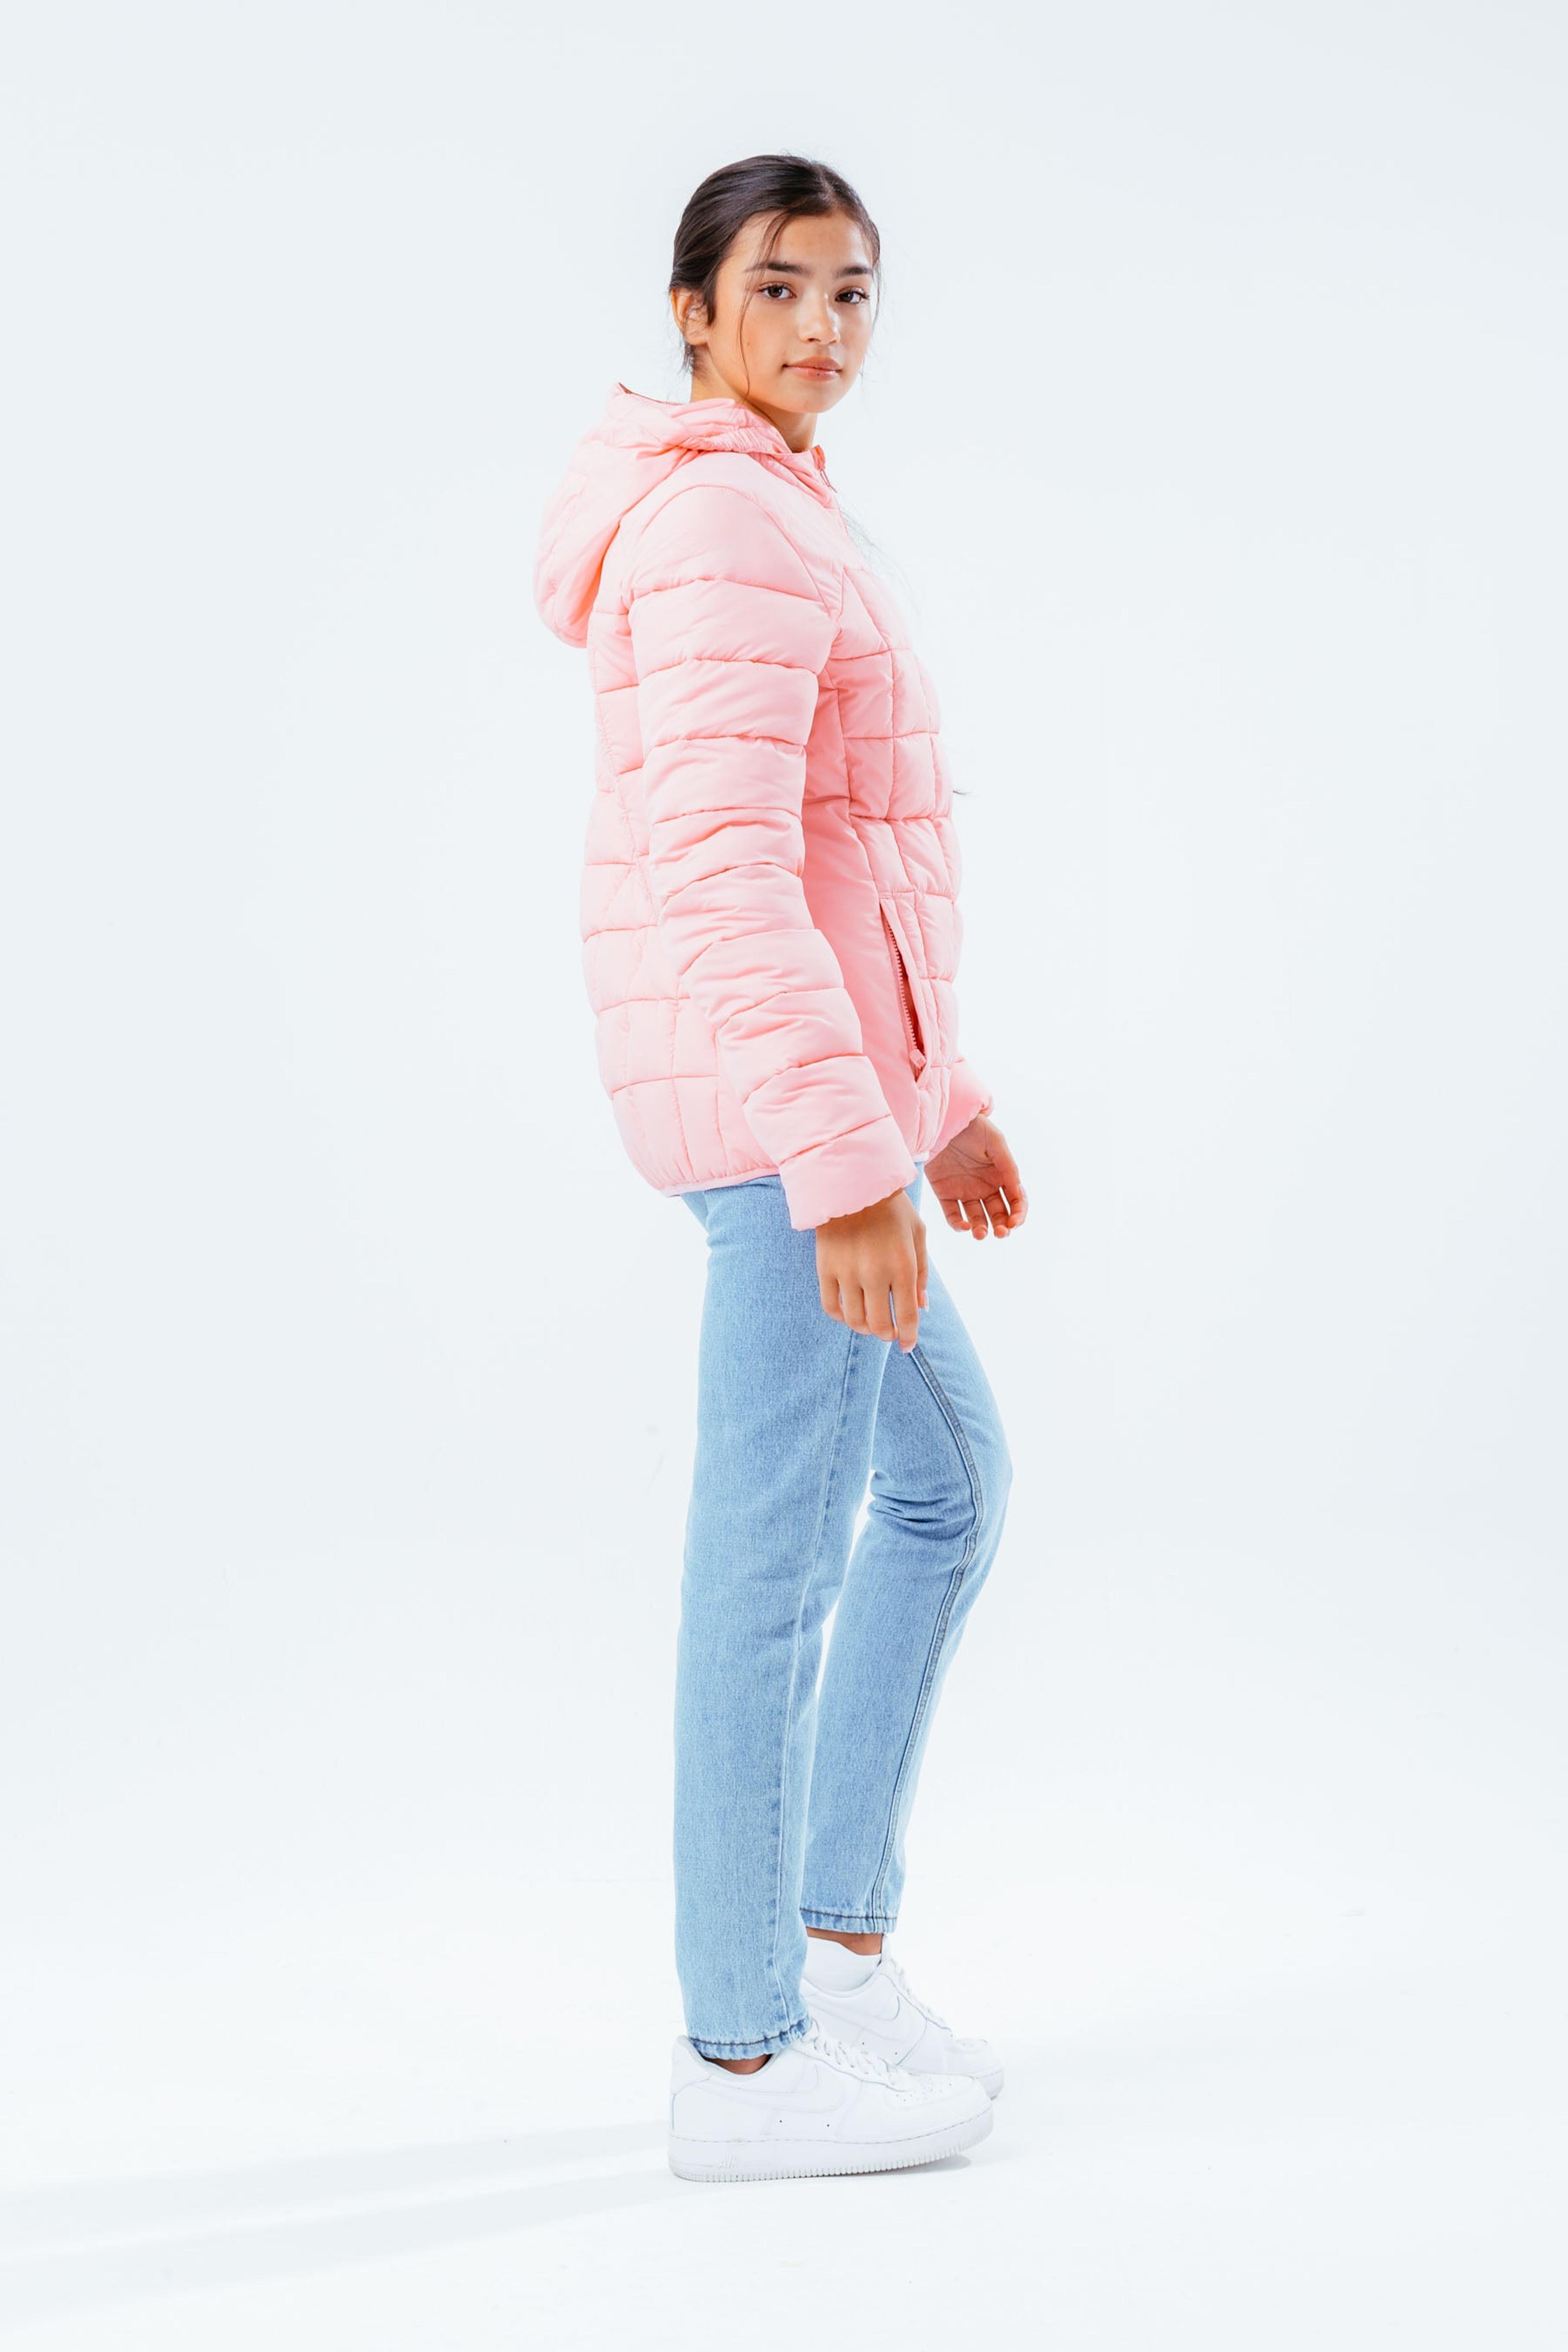 Alternate View 2 of HYPE PALE PINK BAFFLED GIRLS CASUAL JACKET